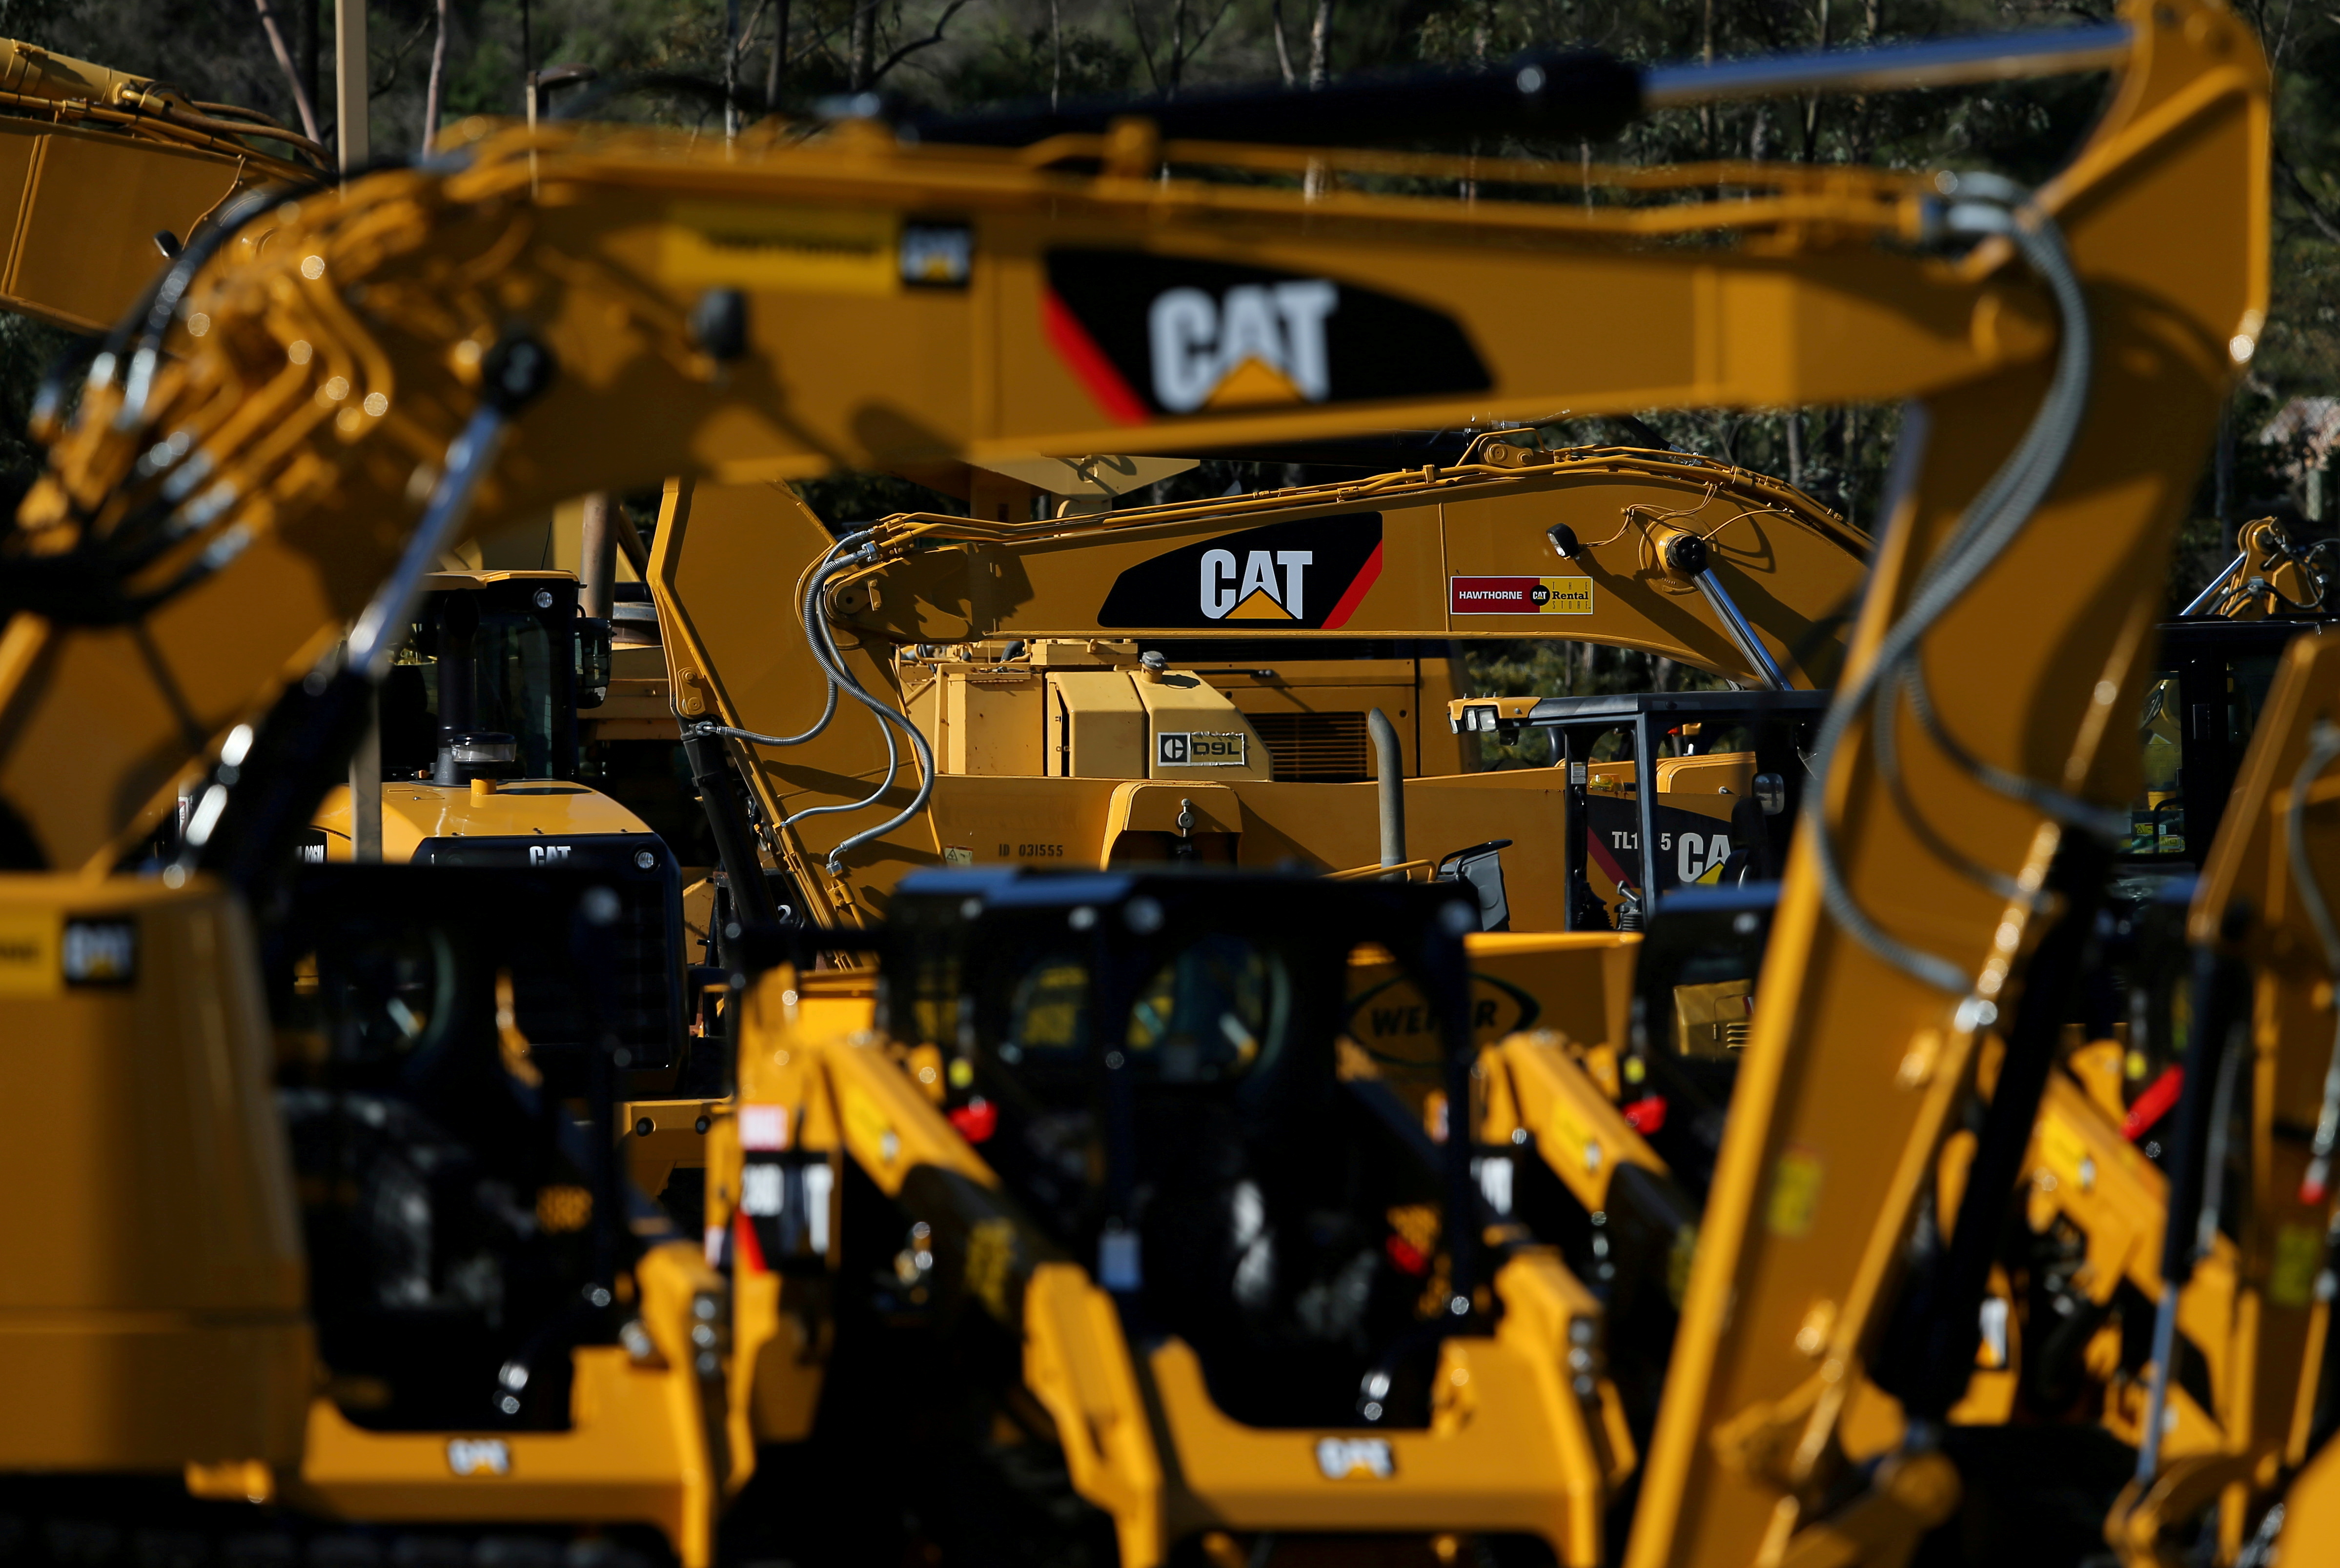 Caterpillar Inc. equipment is on display for sale at a retail site in San Diego, California, U.S., March 3, 2017.    REUTERS/Mike Blake/File Photo